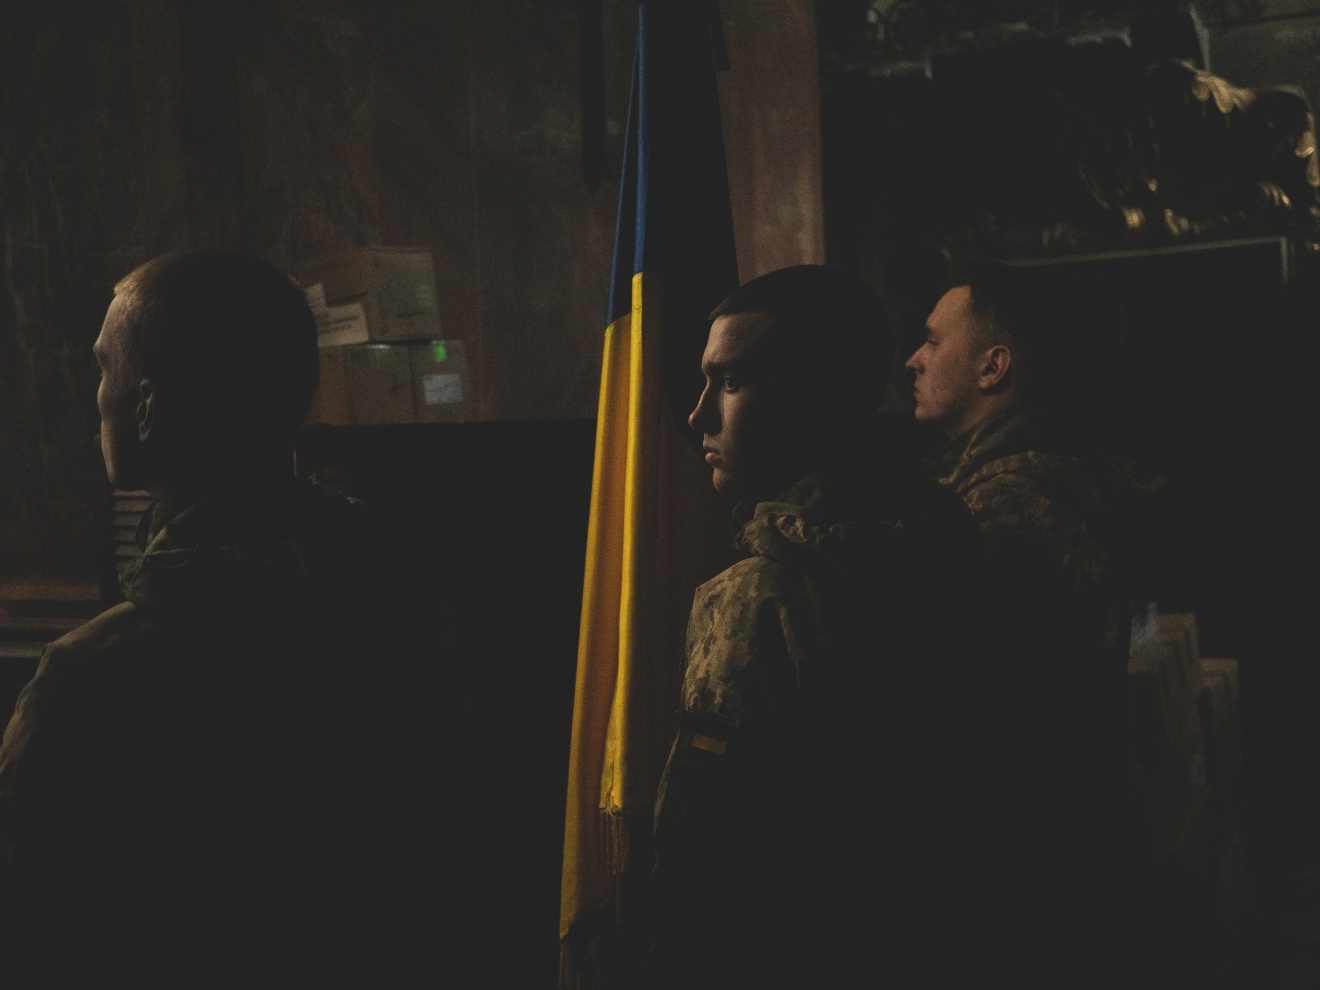 001_brokenpromises - Ukraine; Lviv; 2022

Funeral at the church of Apostles Peter and Paul in the city centre of Lviv. 
3 soldiers of the 80th brigade were killed in Mykolaiv region. 
